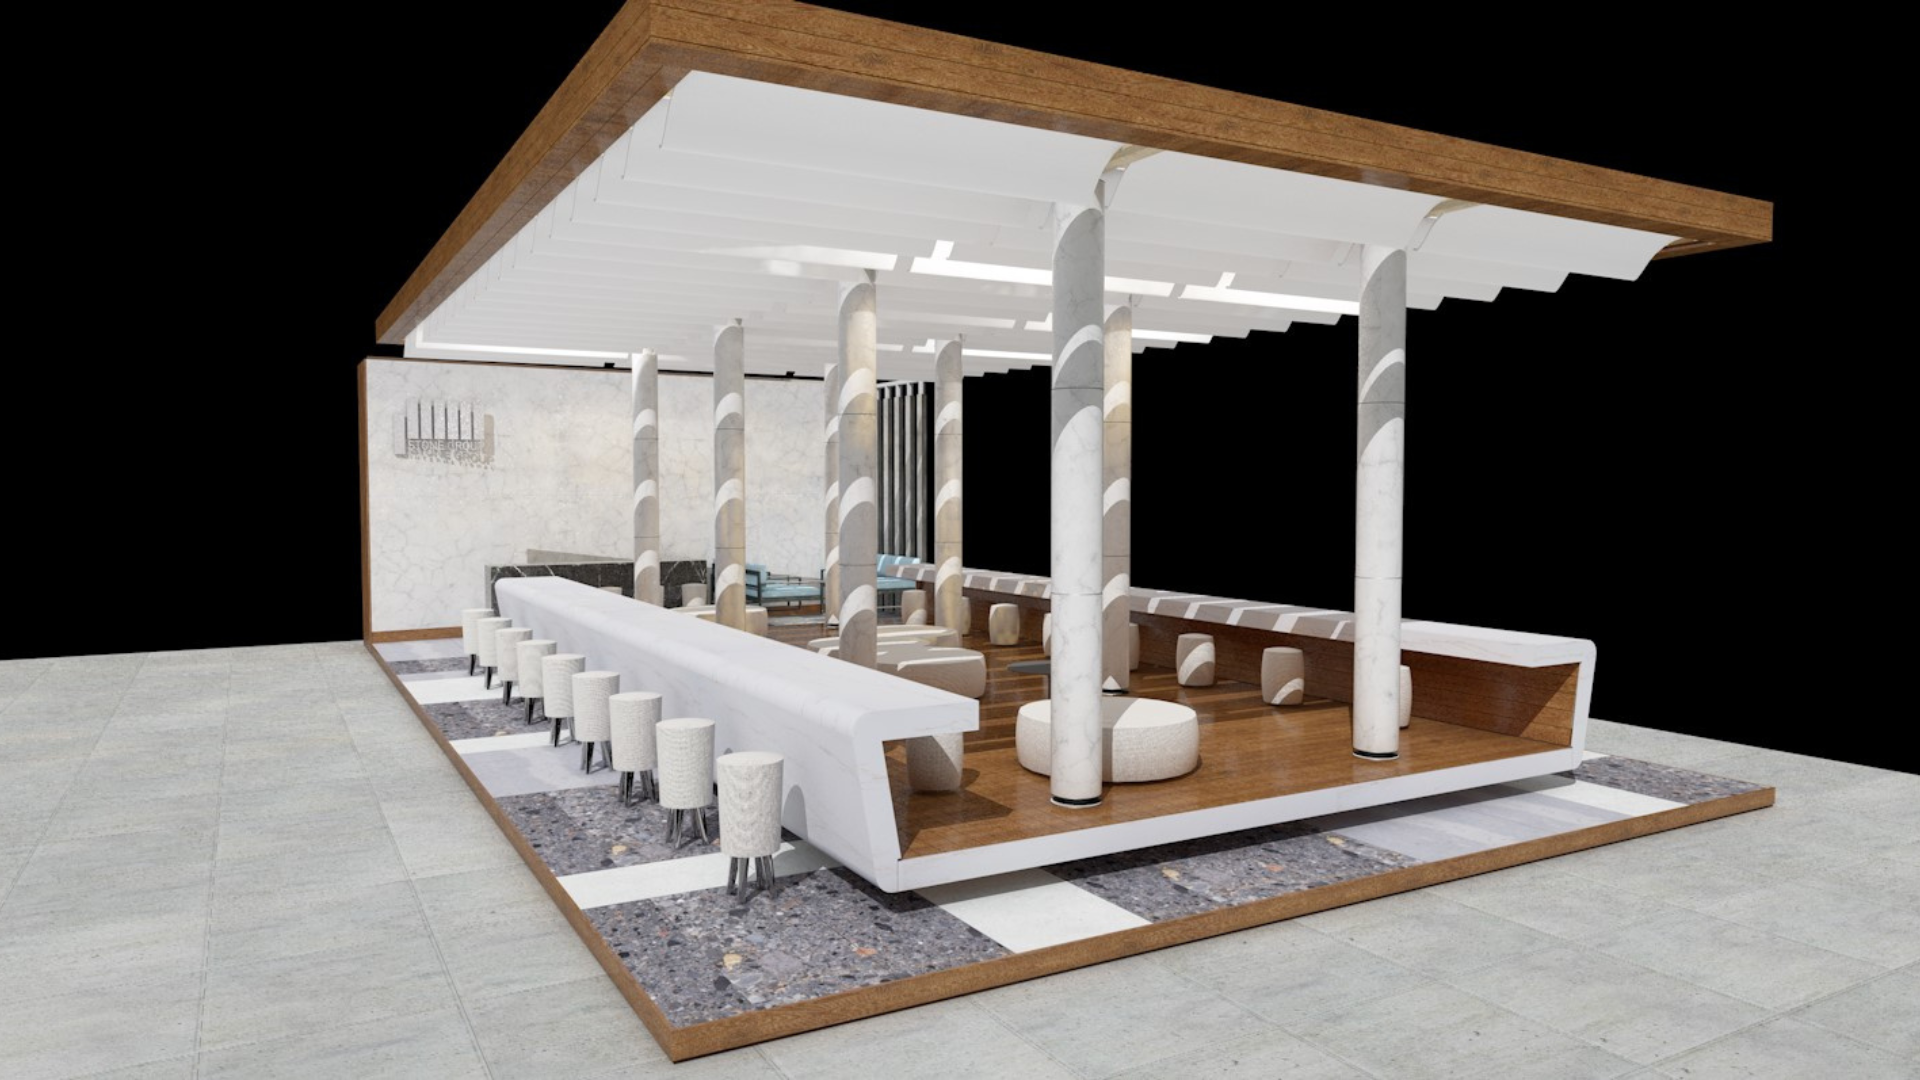 Mockup of hall 6 stand D2 at Marmomac Verona fiere, with natural materials such as wood and marble and design concept dedicated to synergy of humans and nature